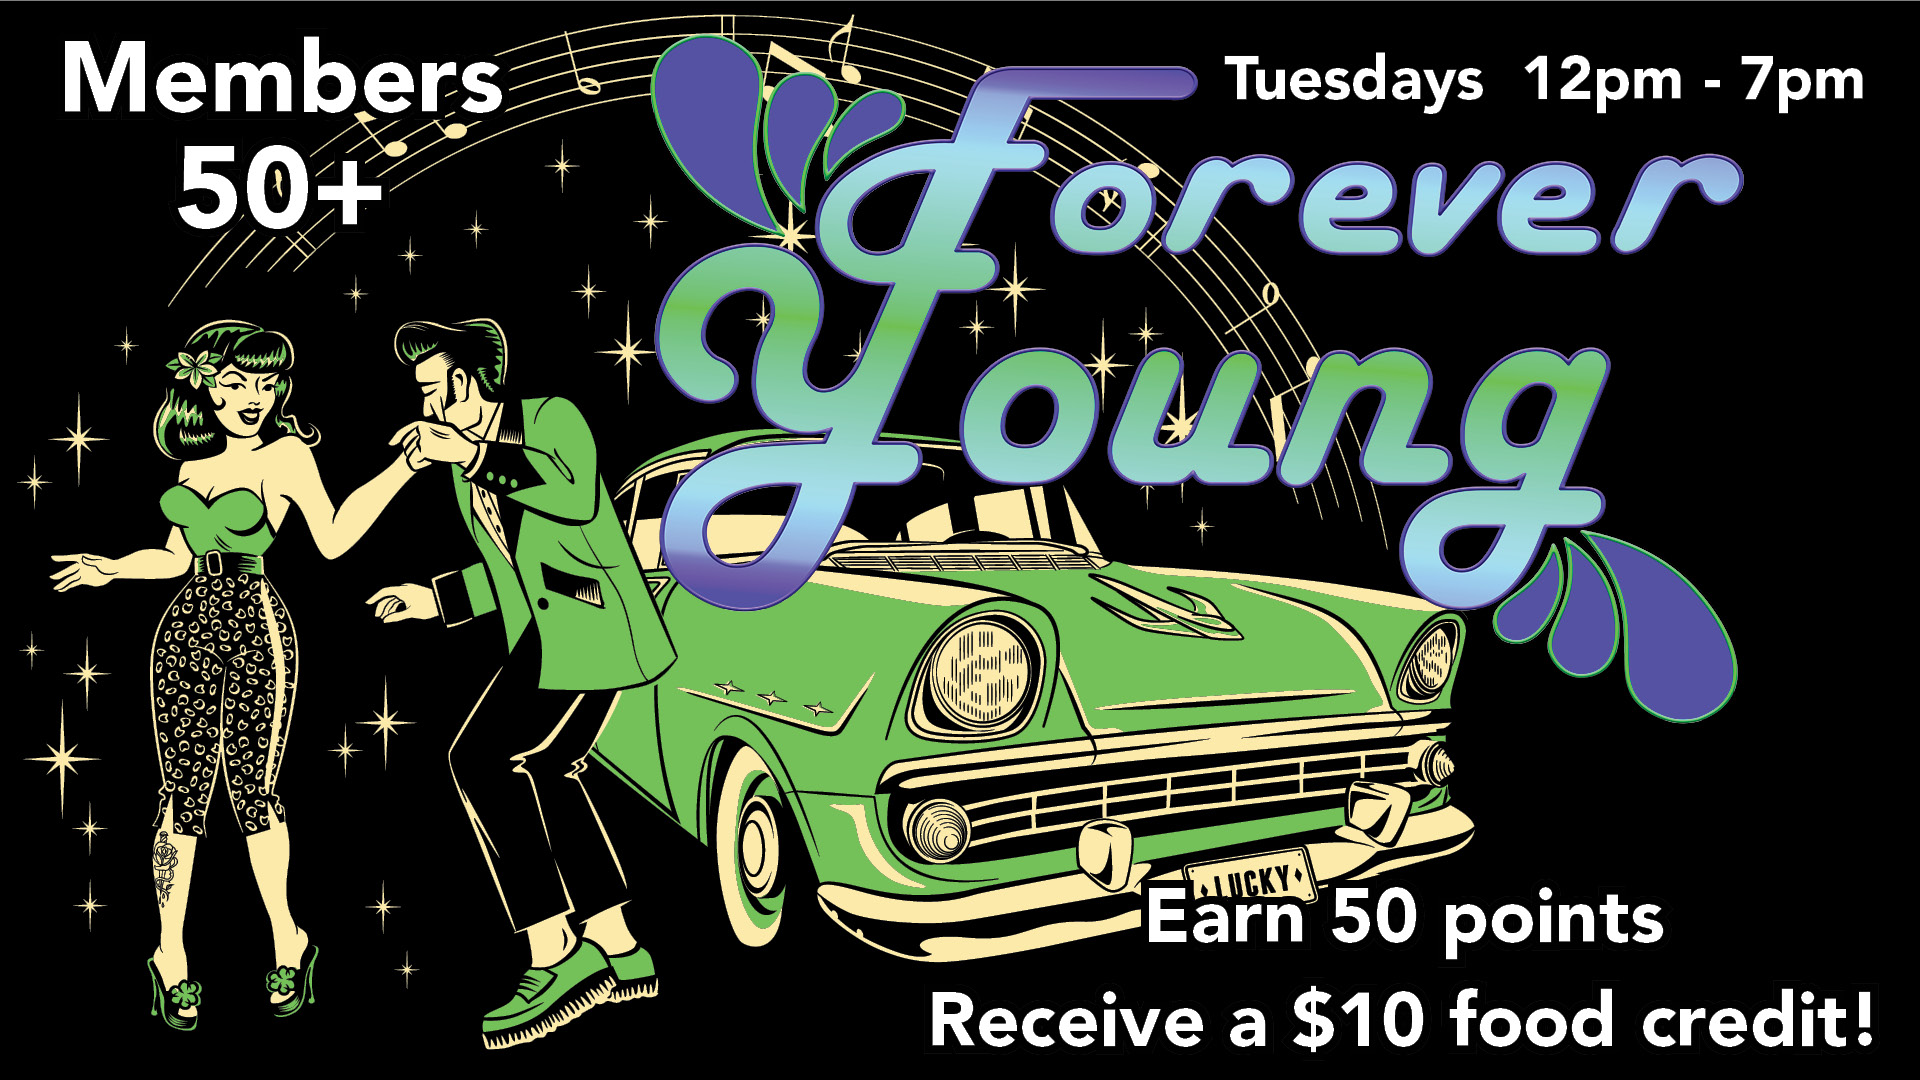 Casino Promotions, Club 50, Dining, Missoula dining, Missoula, Flathead Lake, Forever Young, S&K Gaming, promotions, seniors, slots, credit, food, dinner, lunch, evaro, montana